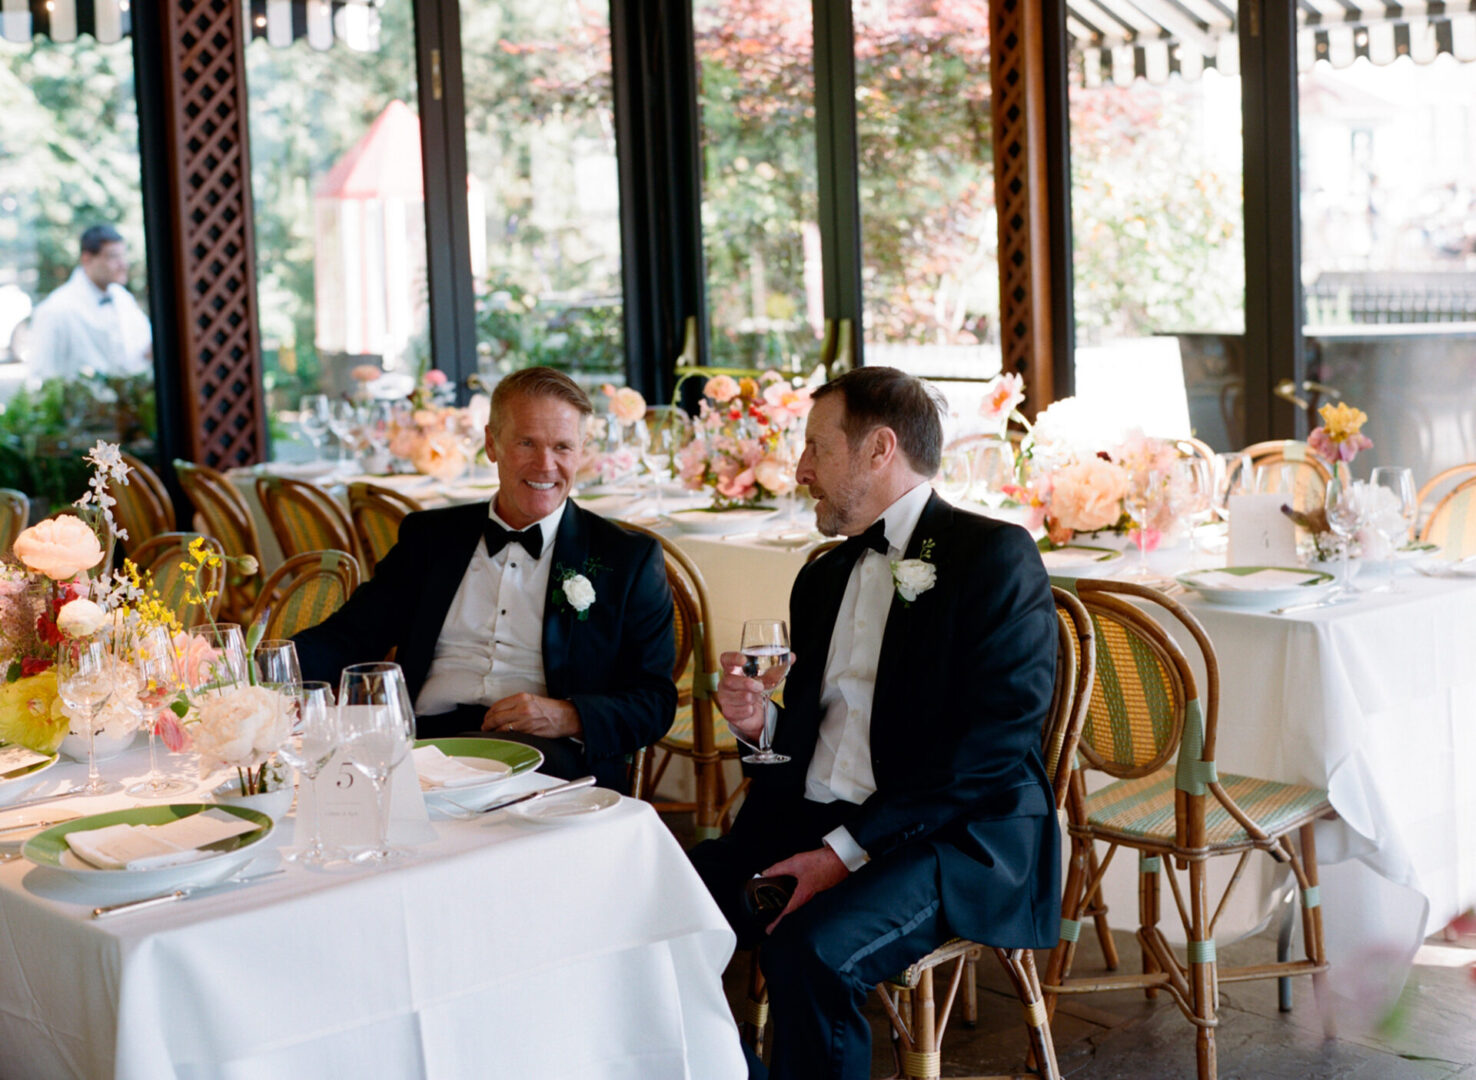 Two wedding guests sitting together at dining table